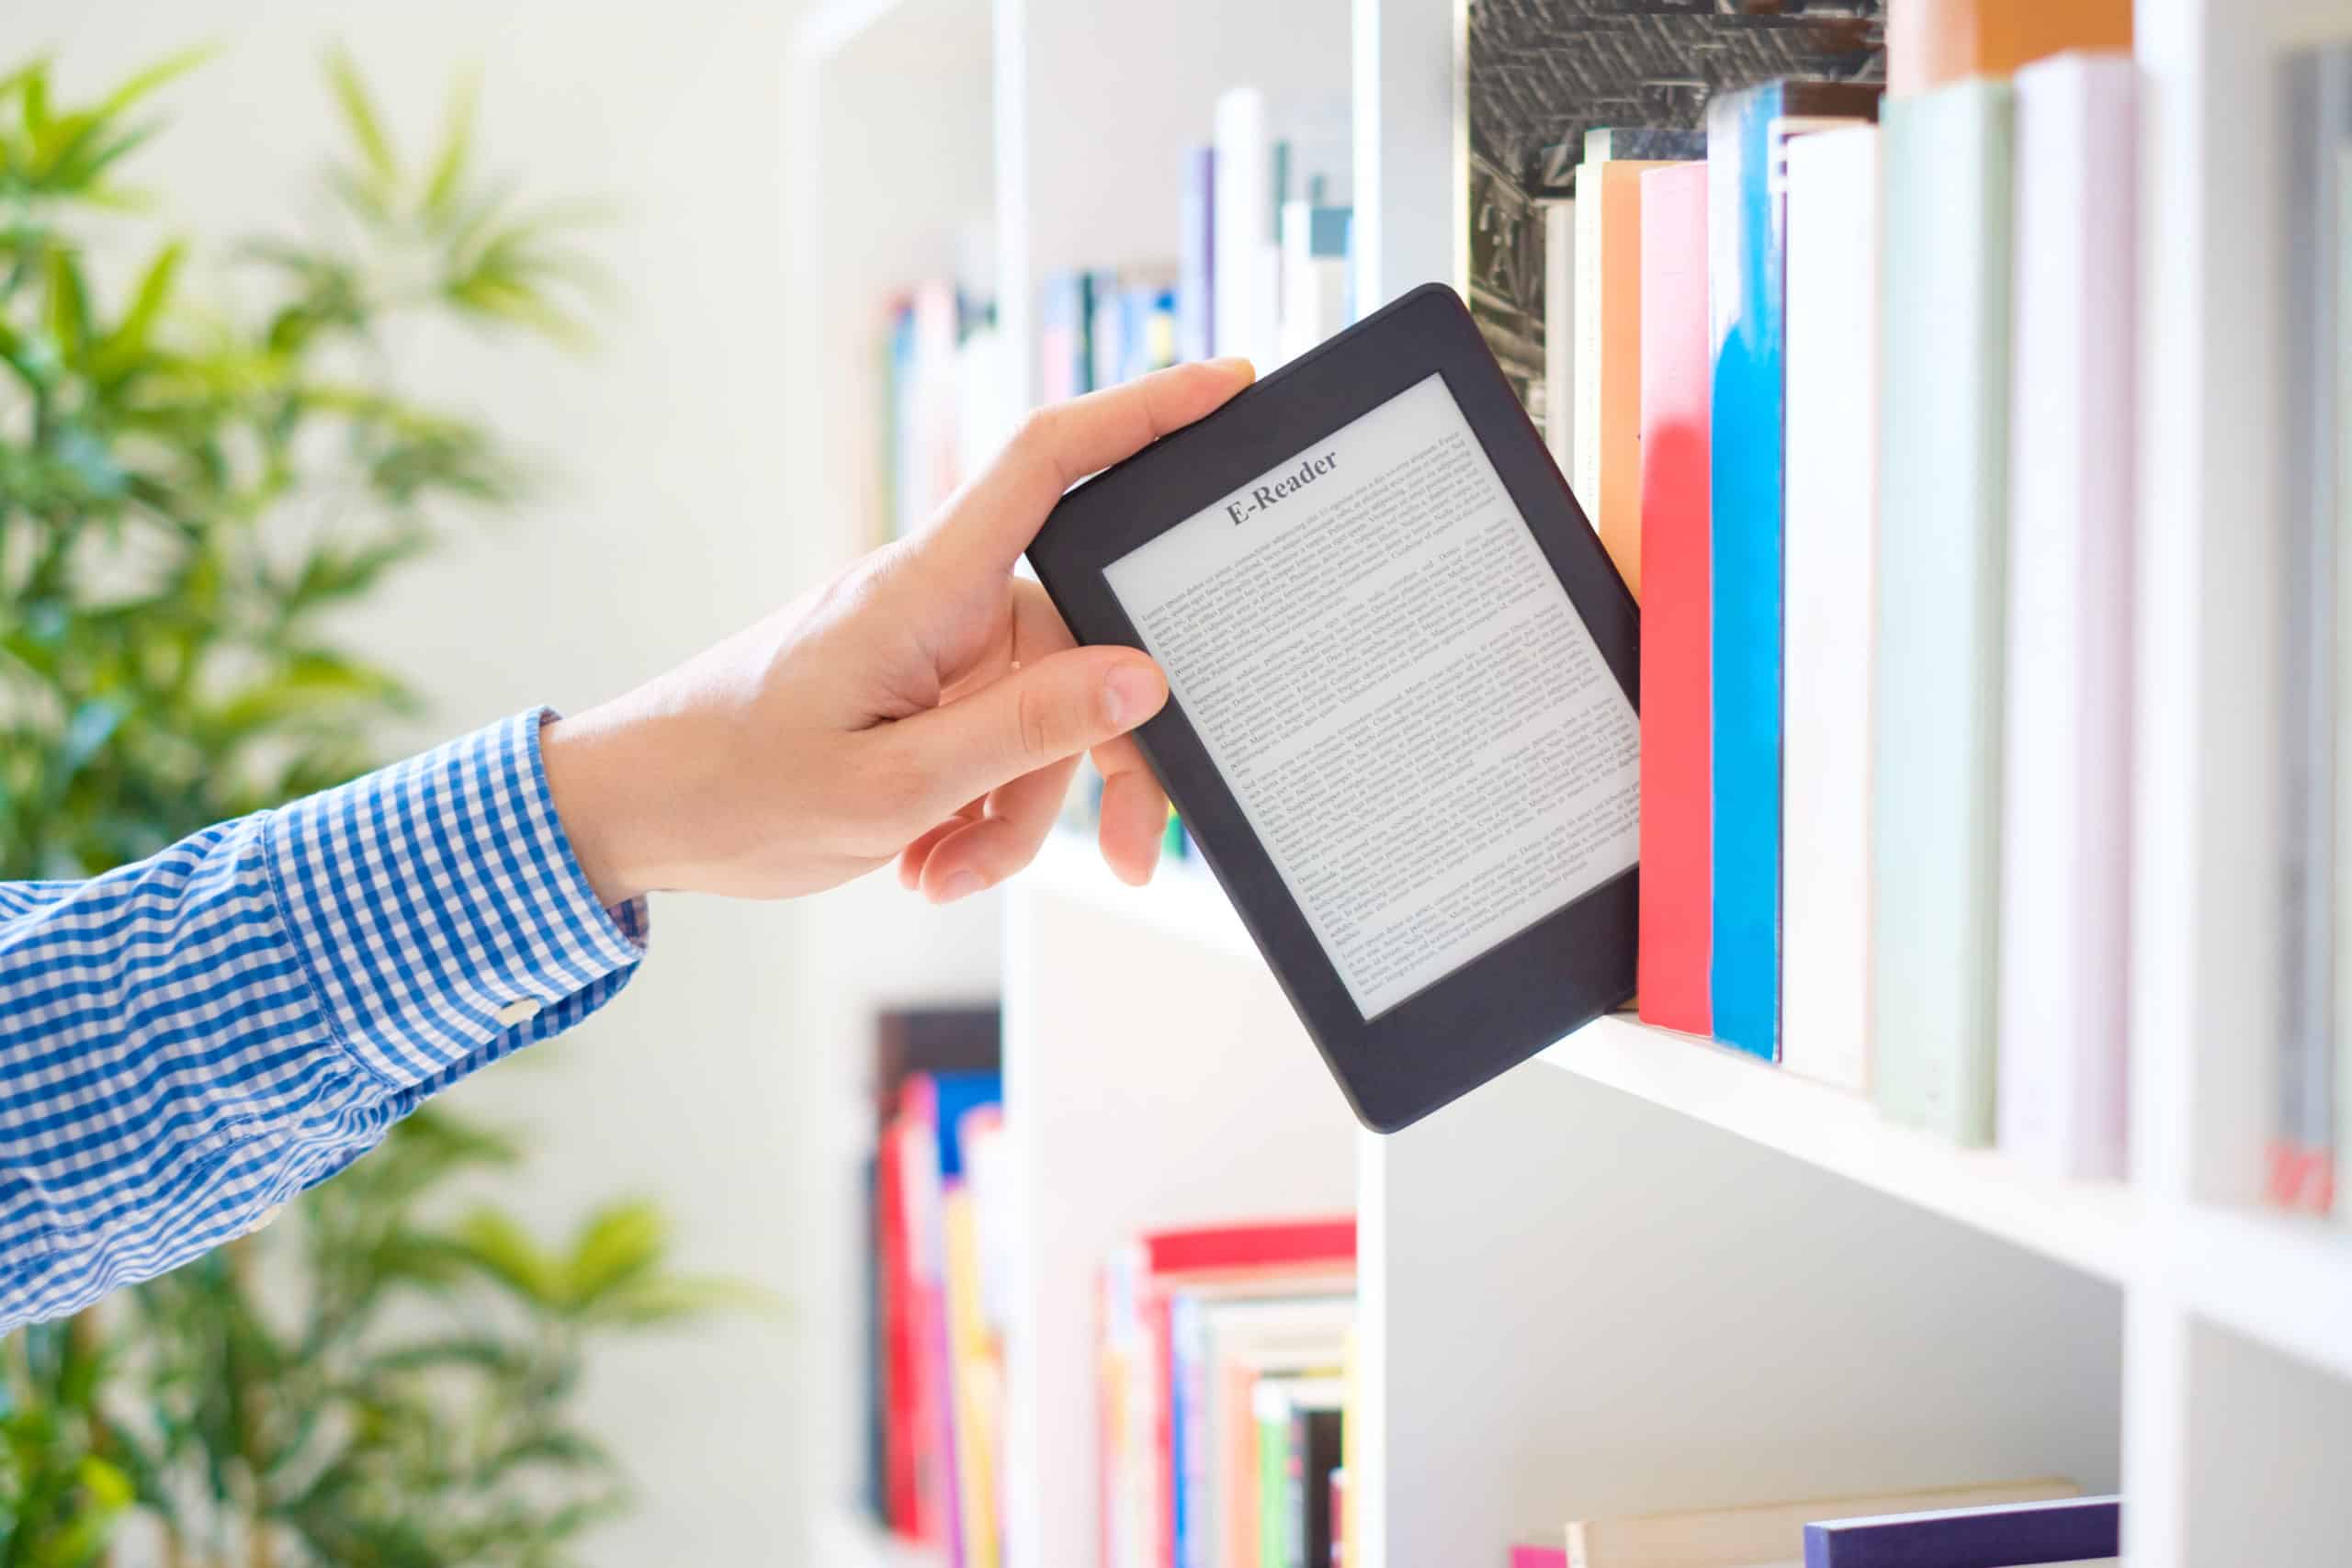 9 Examples of Ebooks that Convert Like Crazy